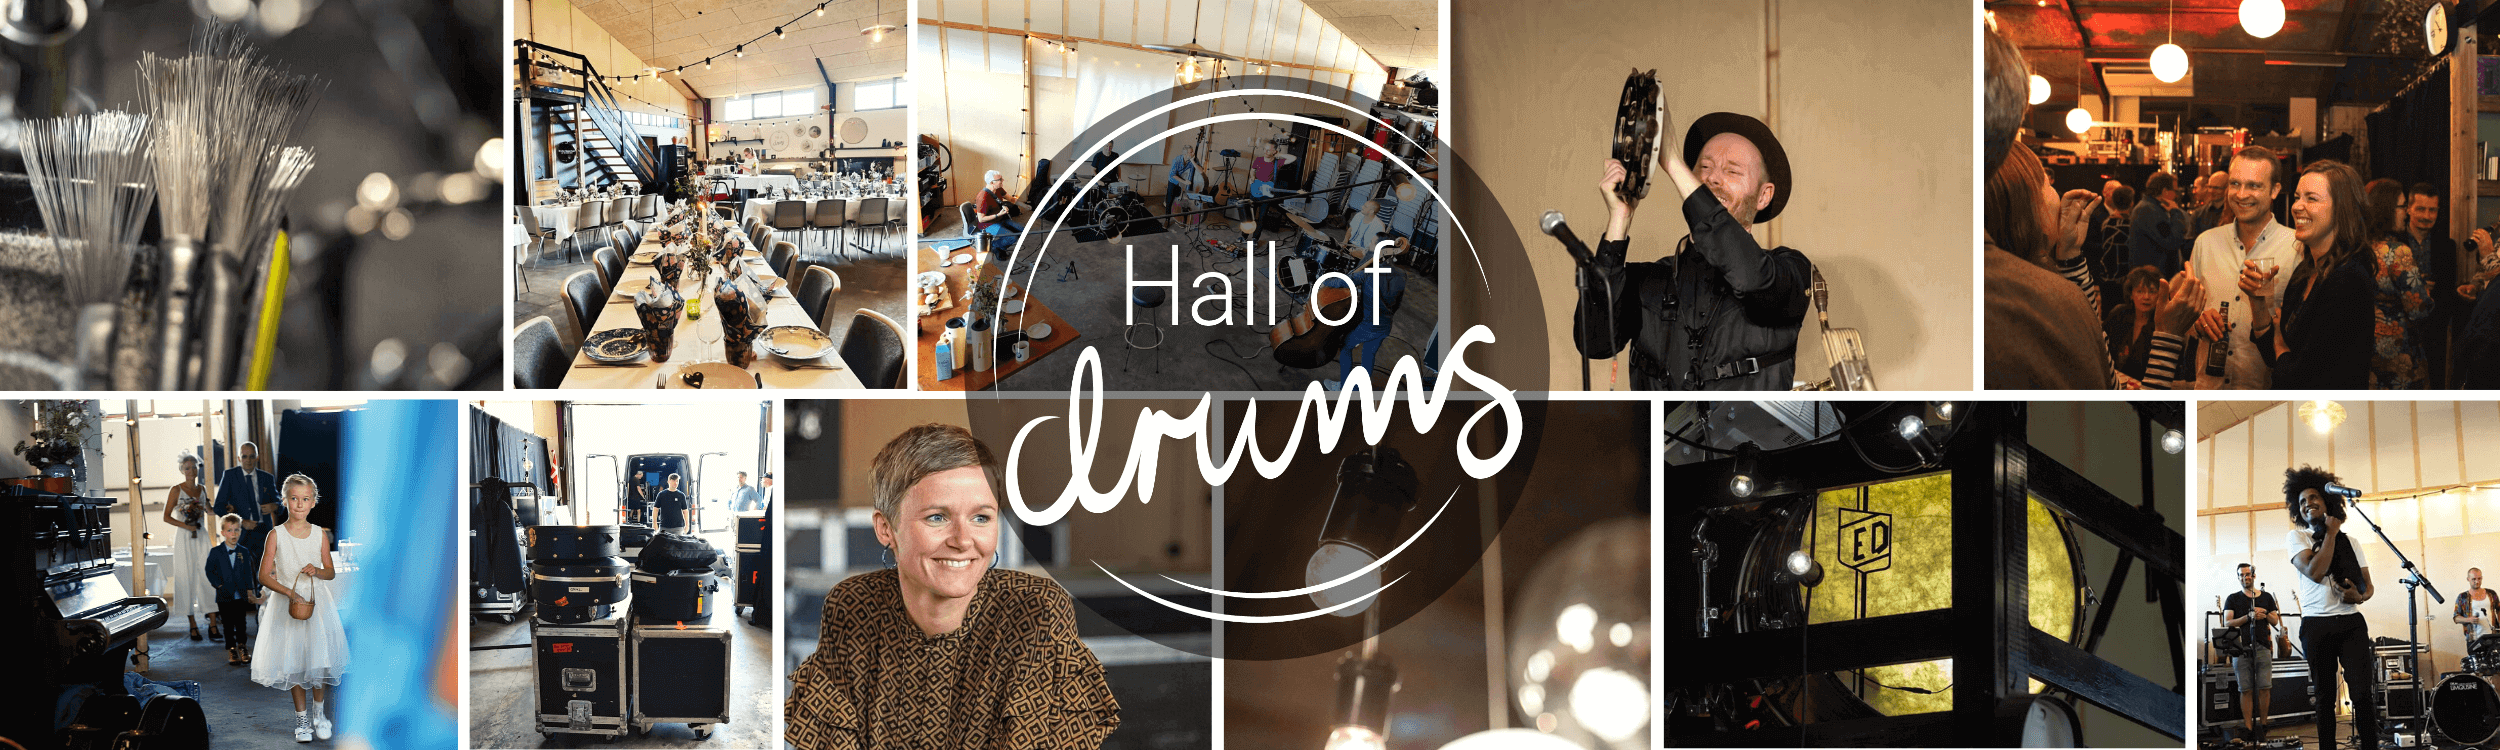 Hall of Drums (1)